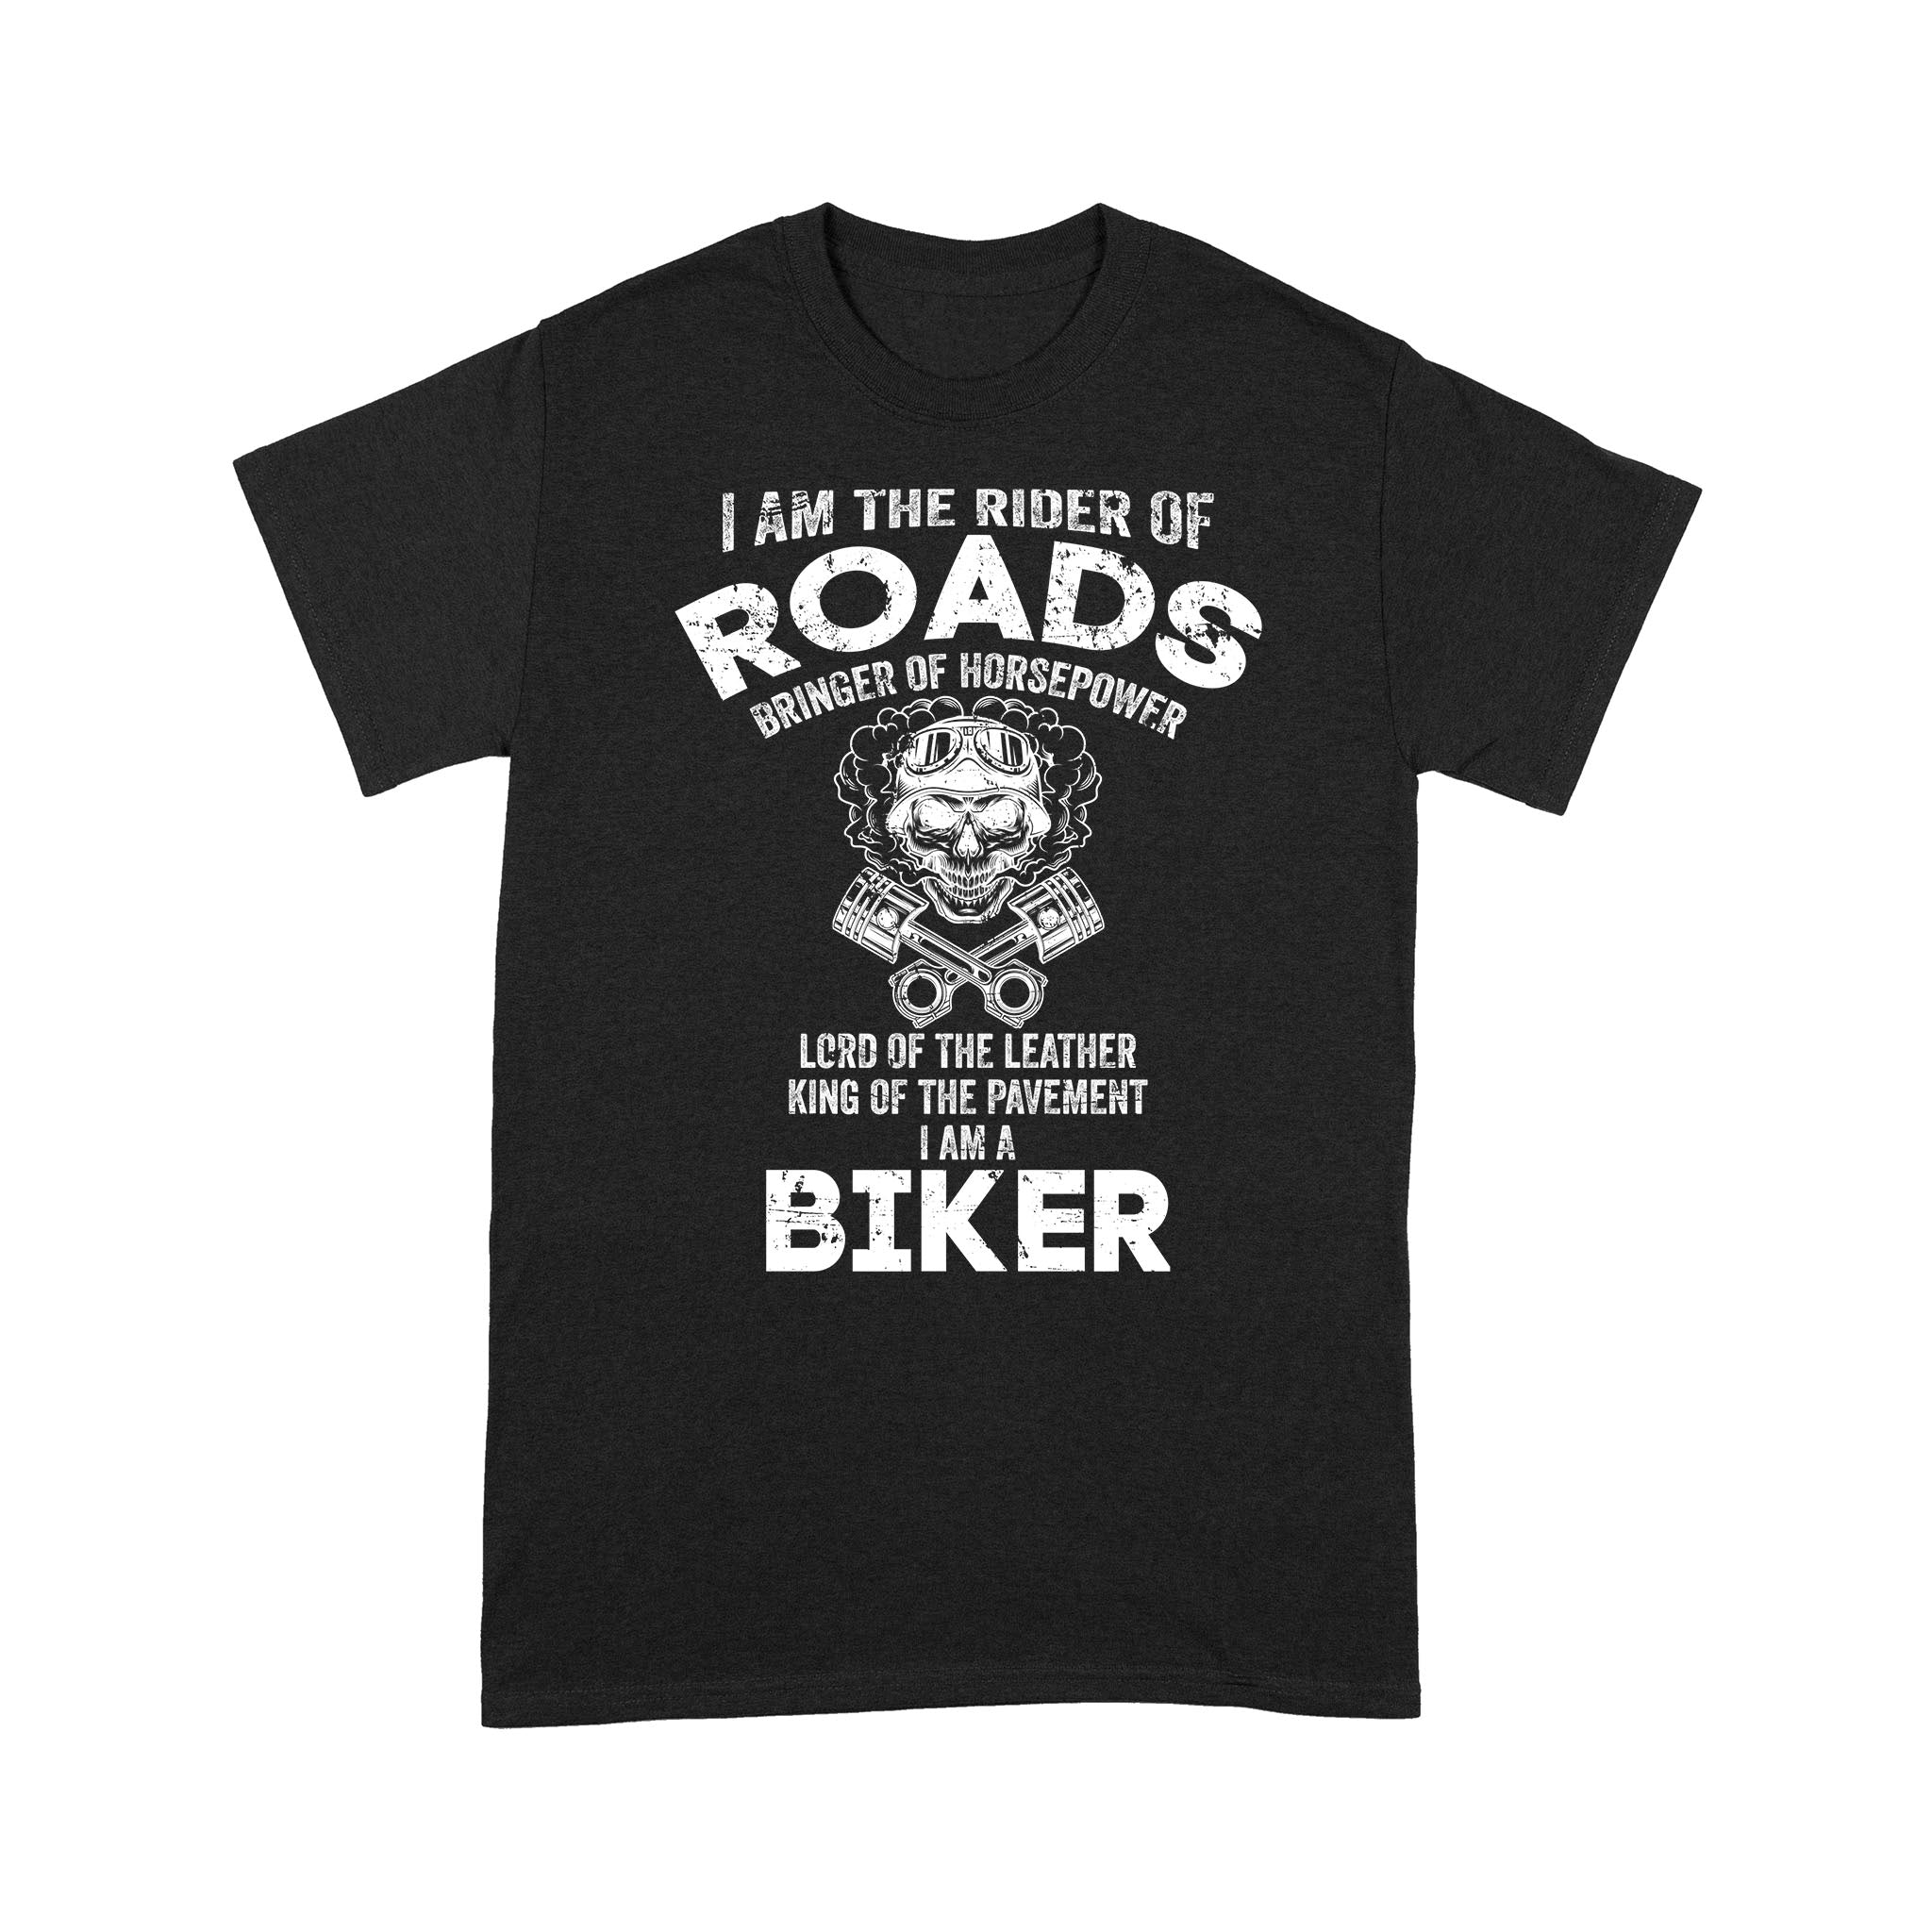 Motocycle Men T-shirt - Rider of Roads Bringer of Horsepower, Cool Riding Tee Motocross Off-road Racing Shirt| NMS130 A01